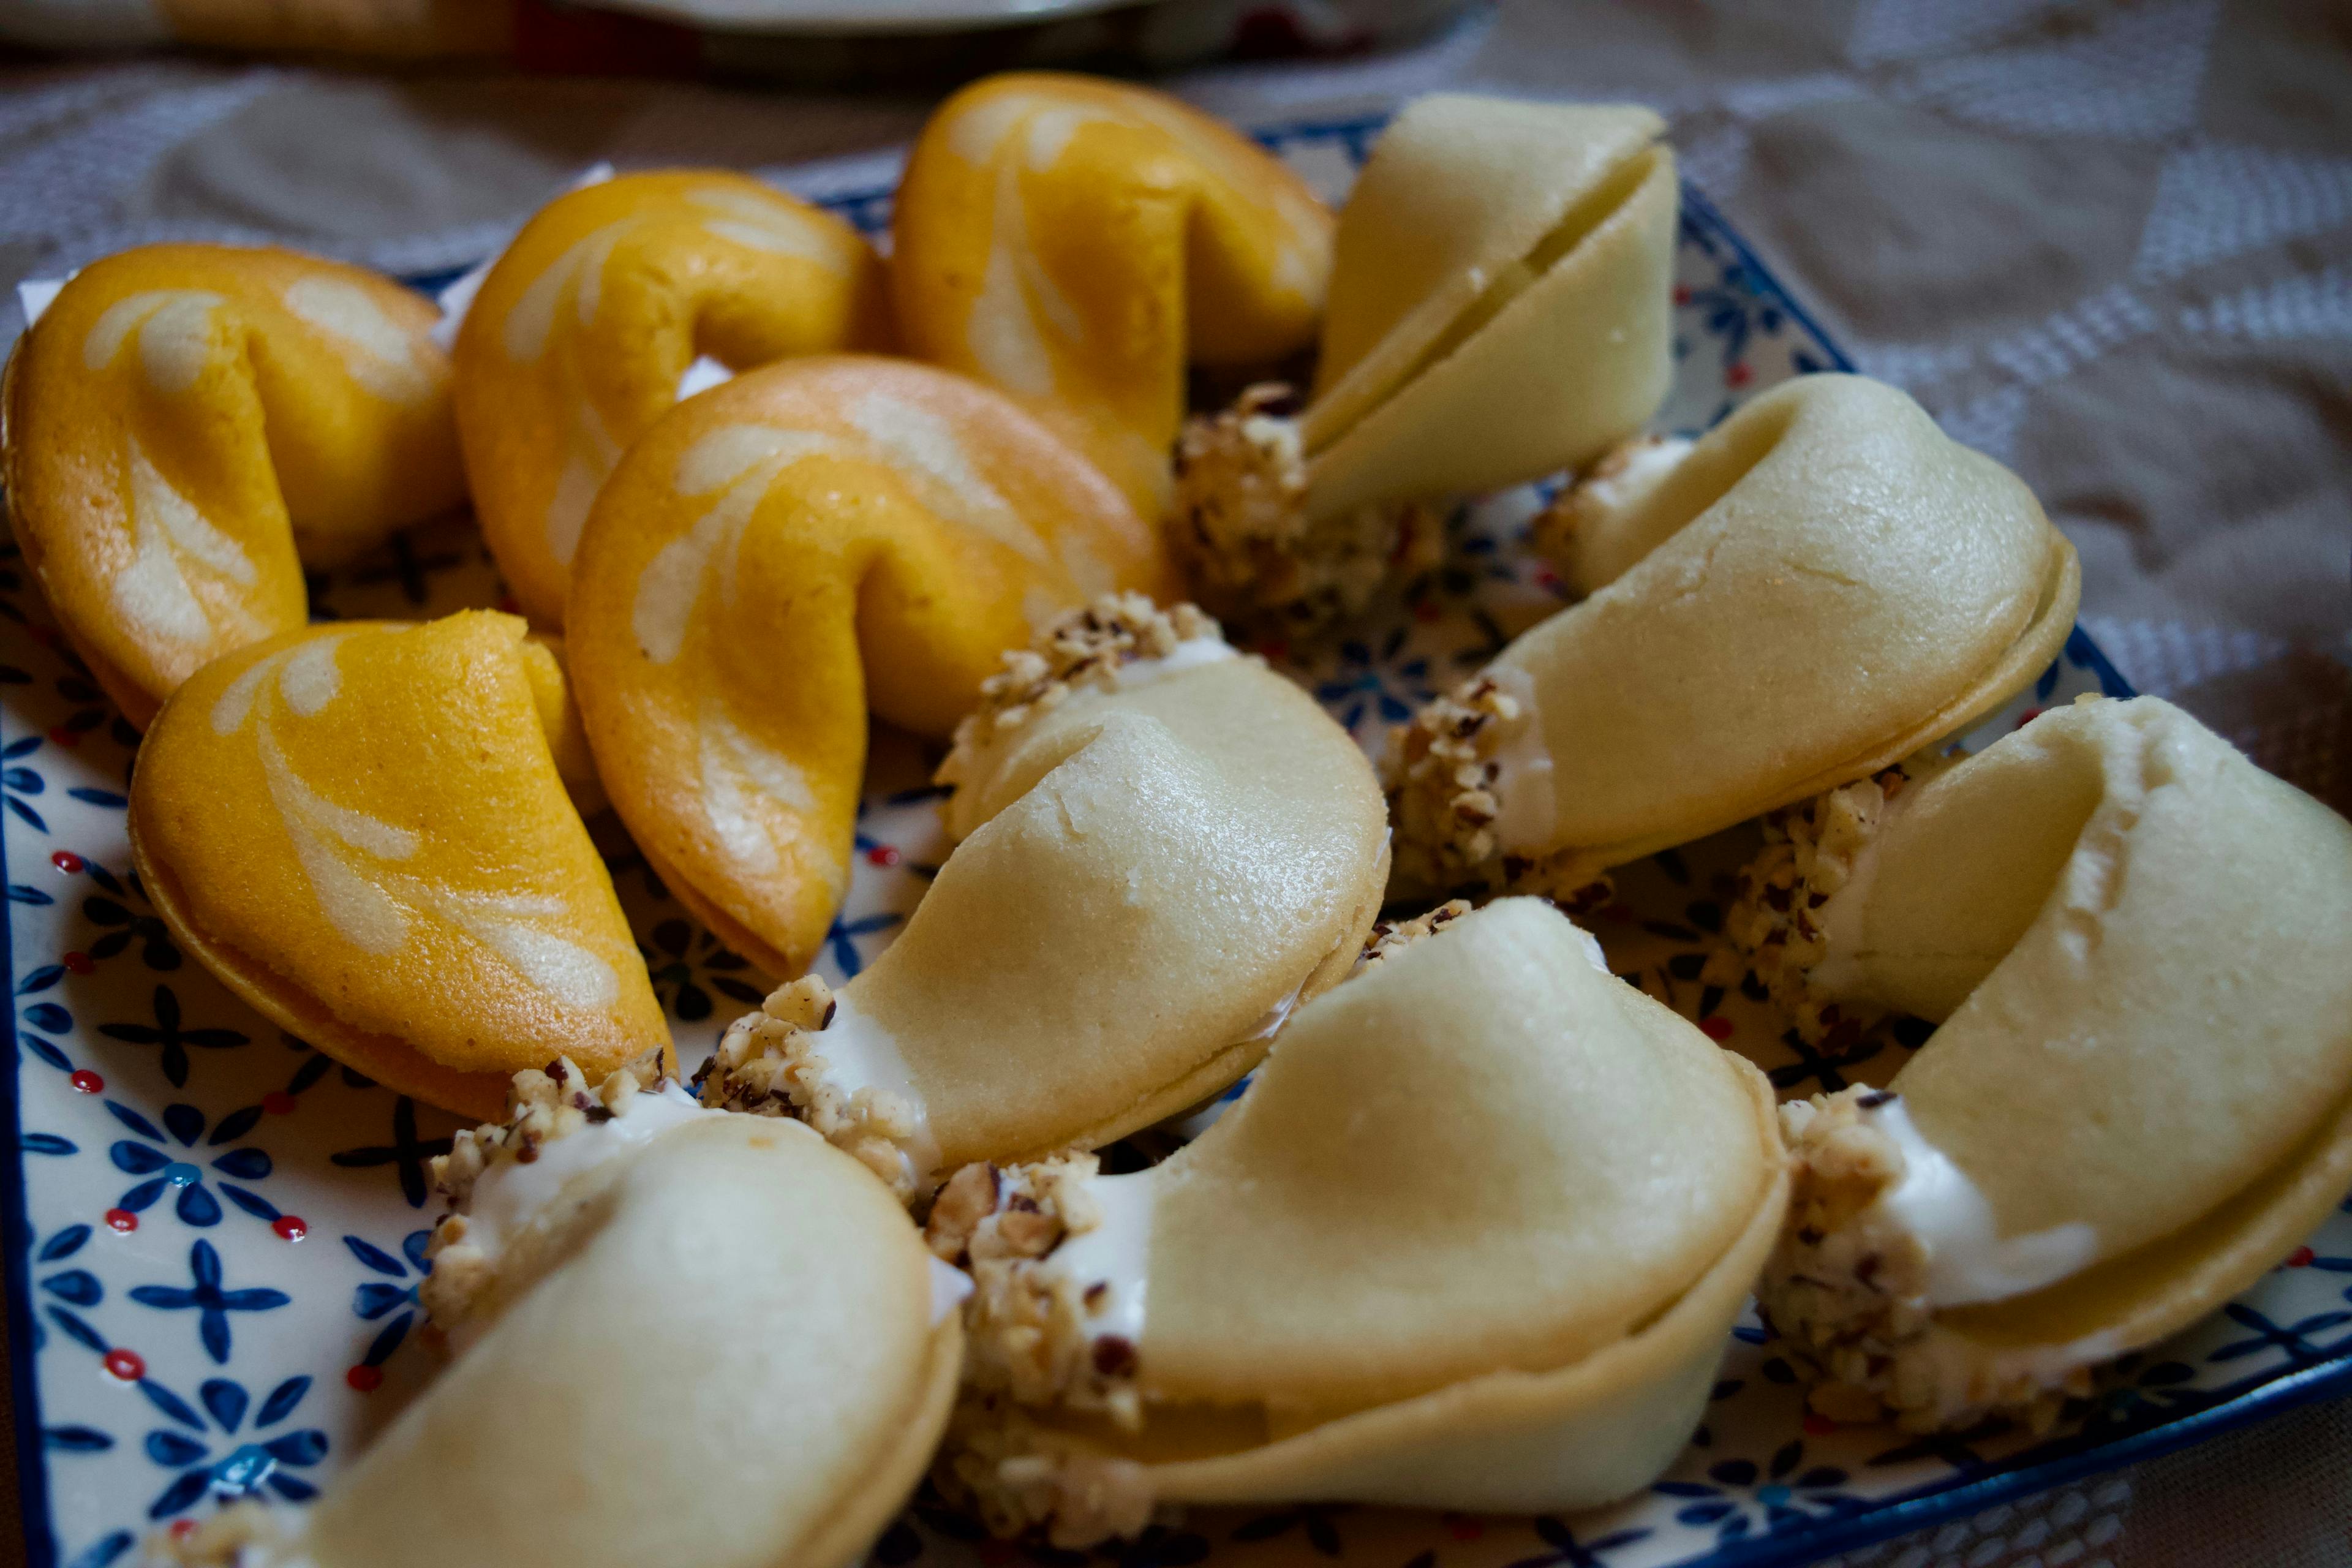 A plate full of fortune cookies